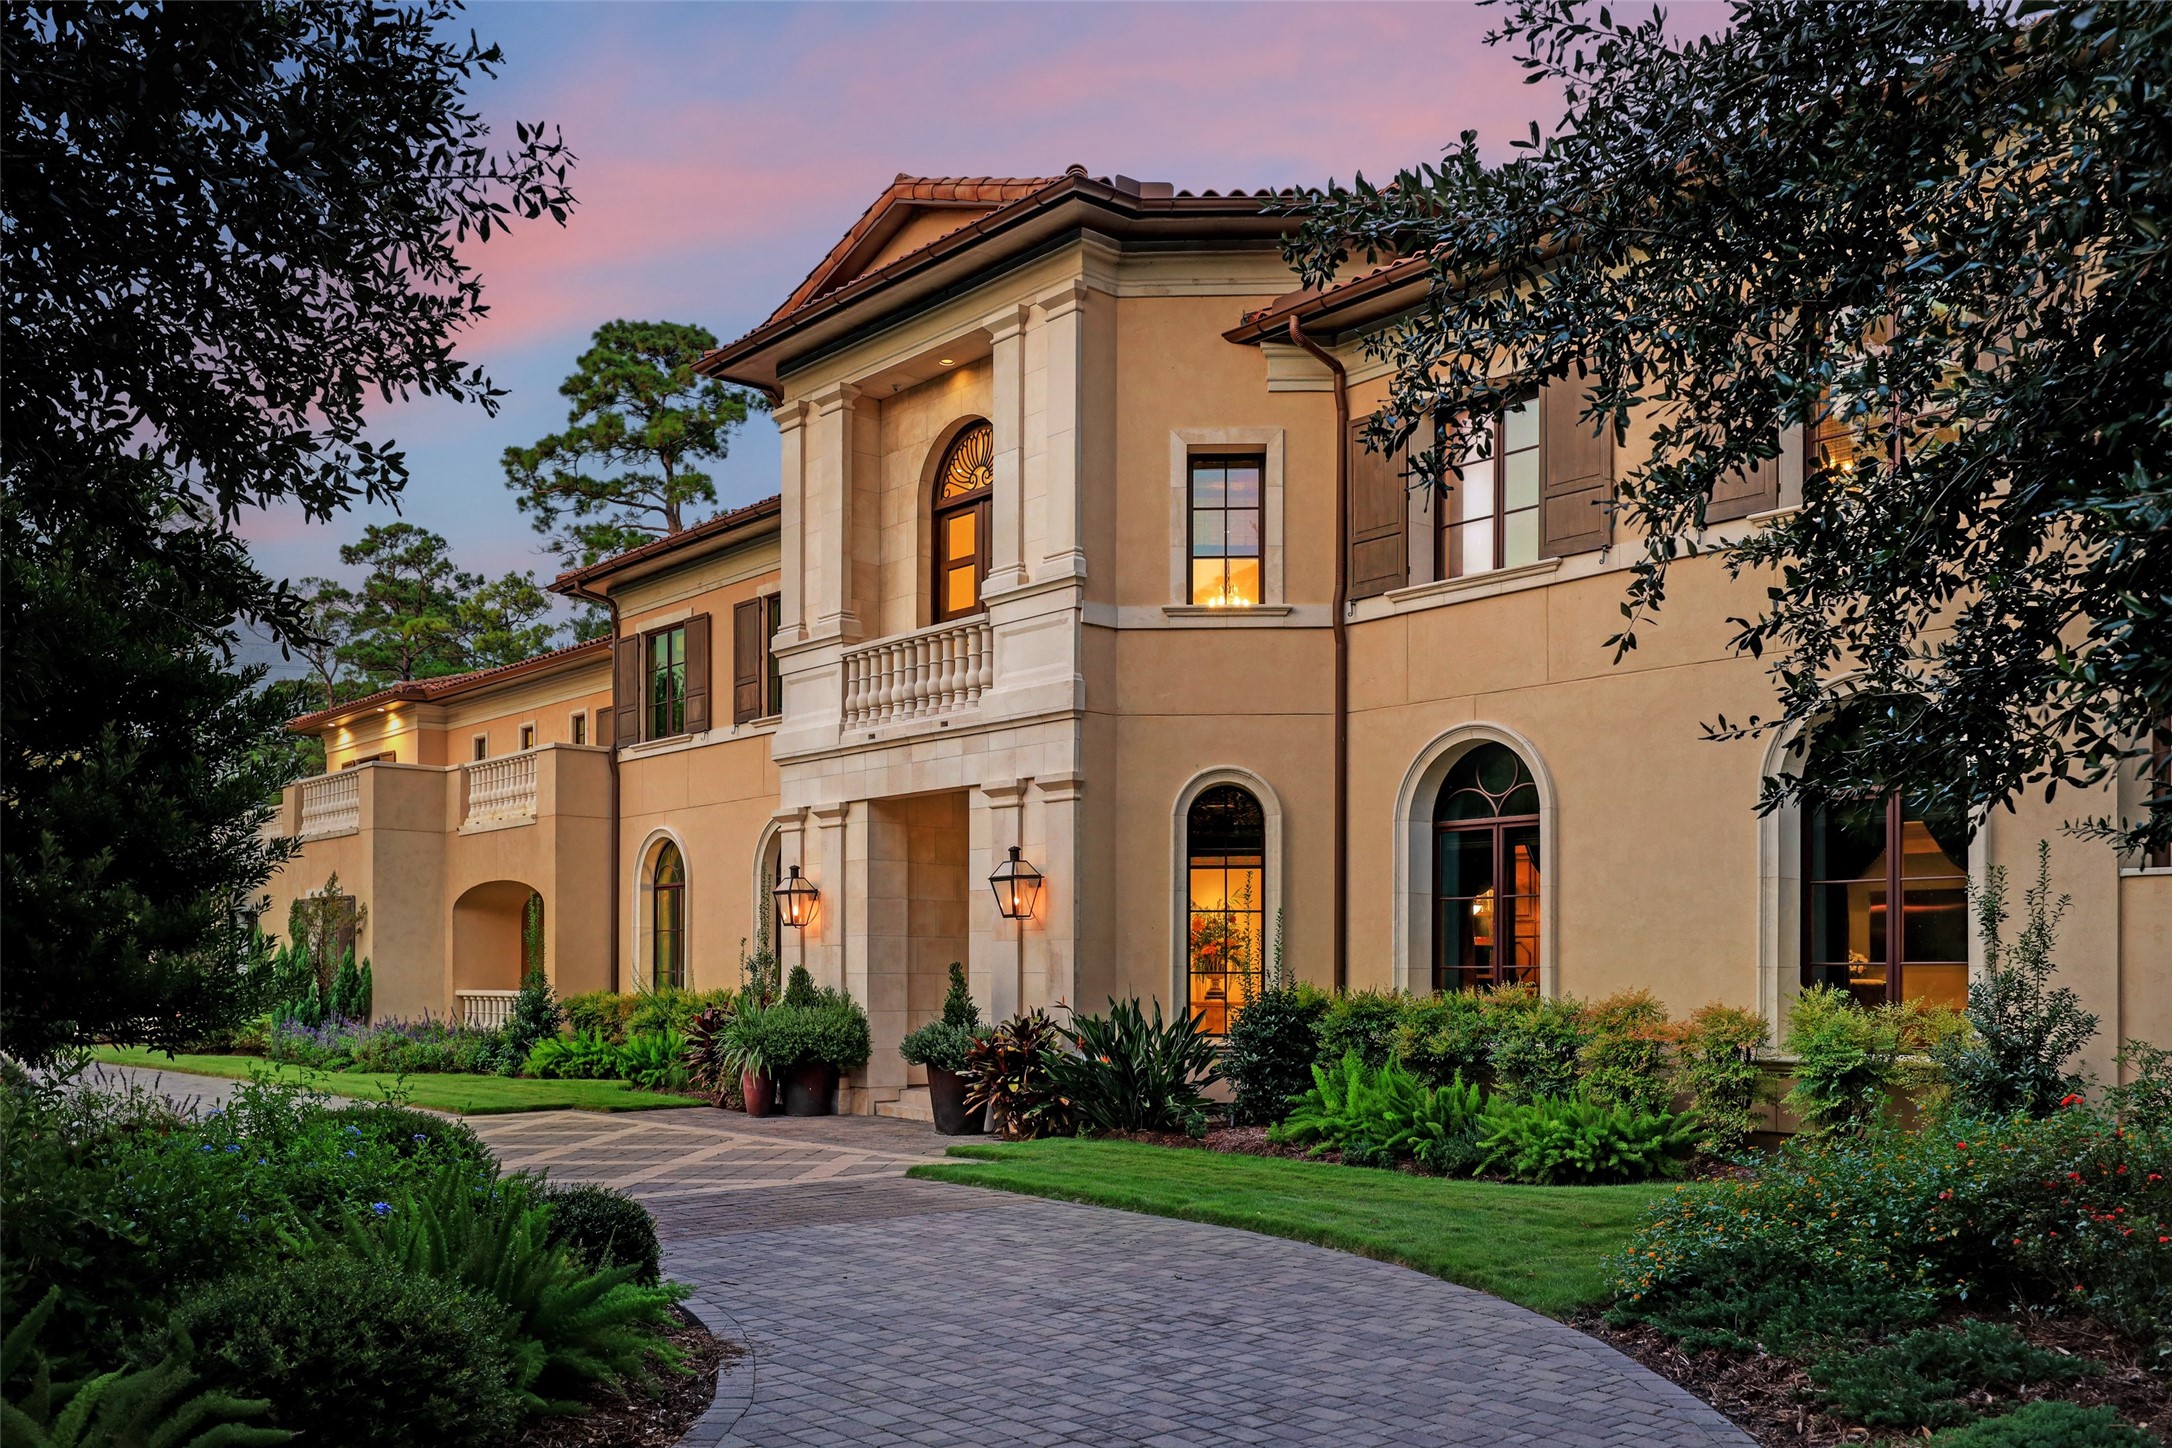 Stately and timeless exterior with impressive scale and incredible design